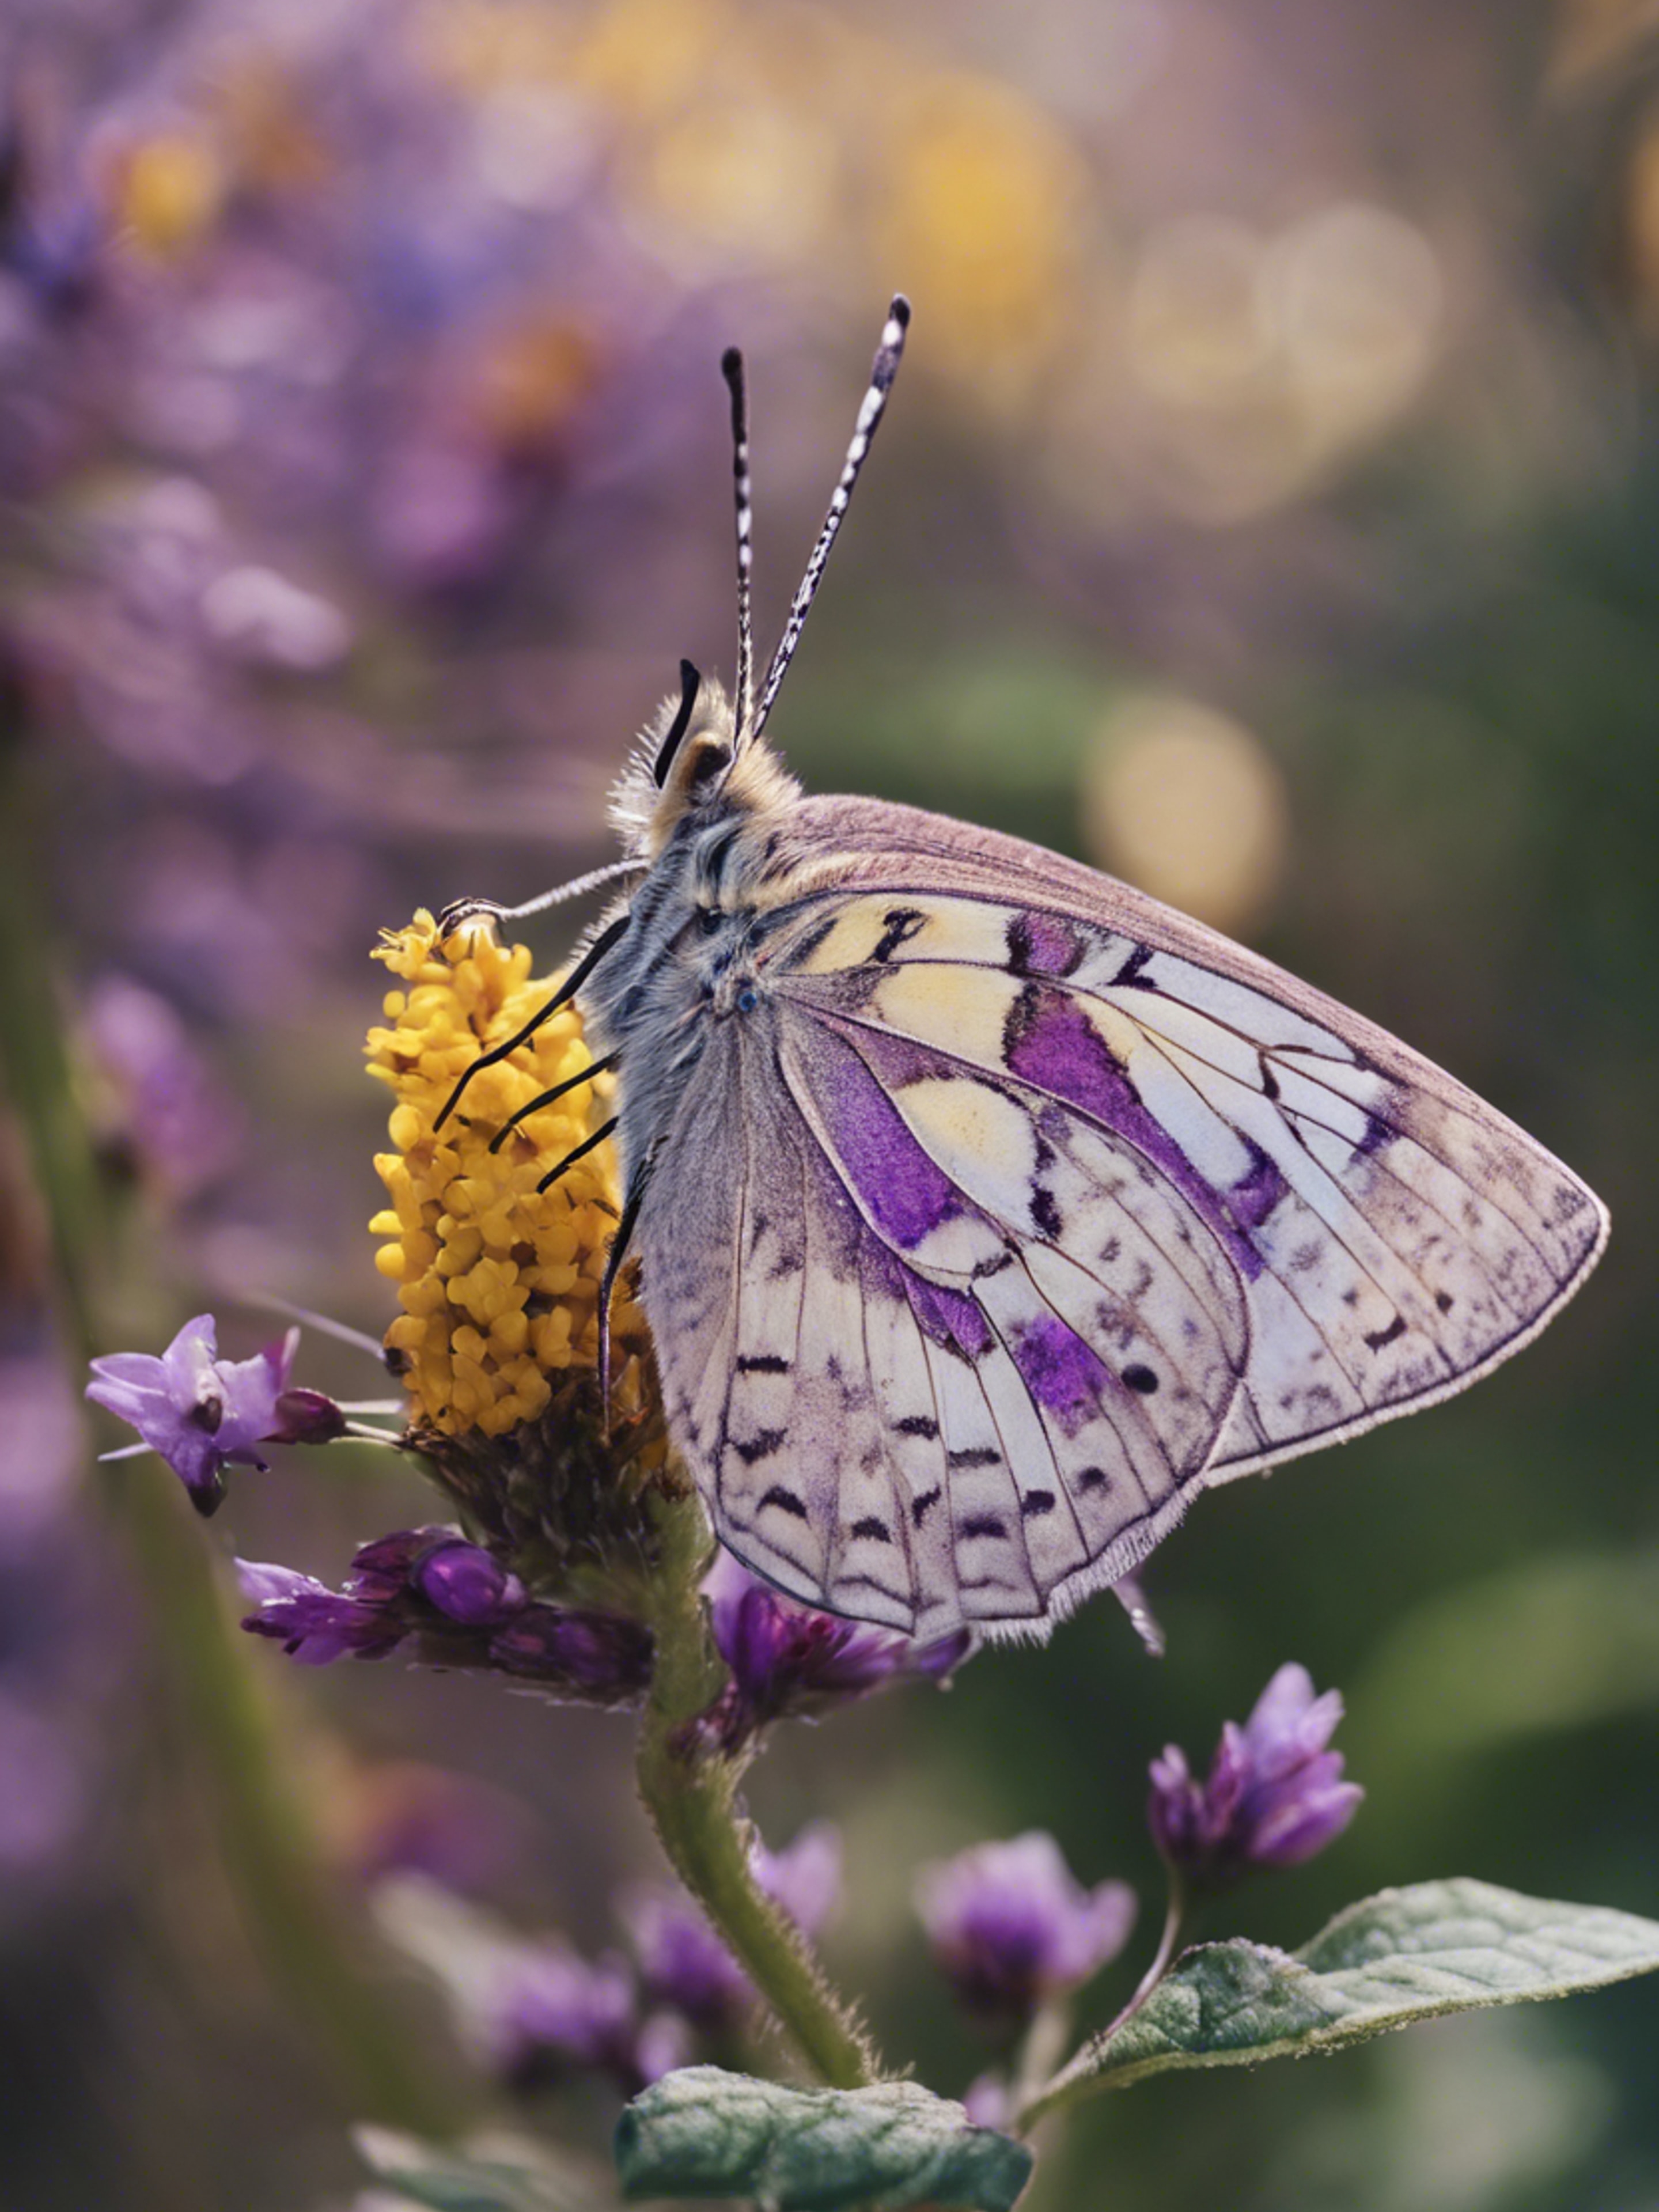 A beautiful butterfly with detailed purple and yellow wings resting on a blooming flower. duvar kağıdı[3e976ae7be264a5da695]